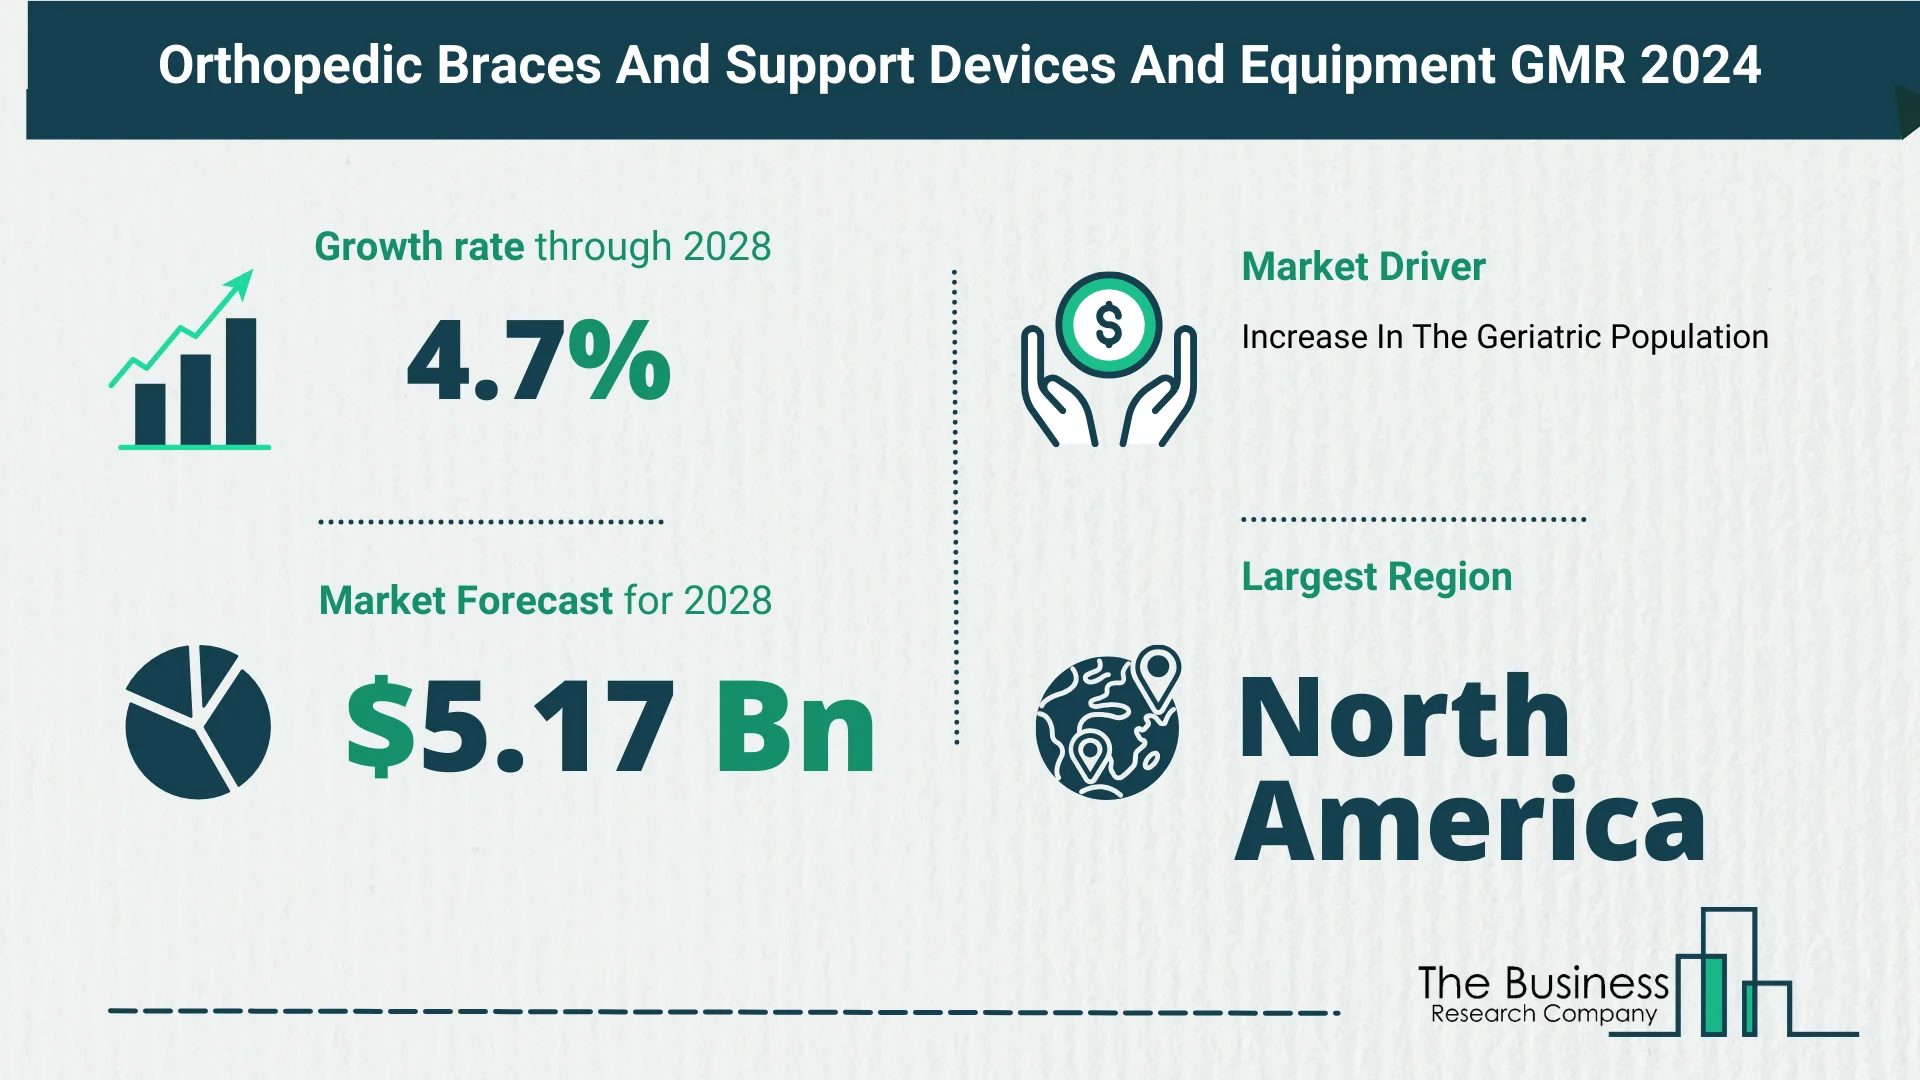 Overview Of The Orthopedic Braces And Support Devices And Equipment Market 2024: Size, Drivers, And Trends